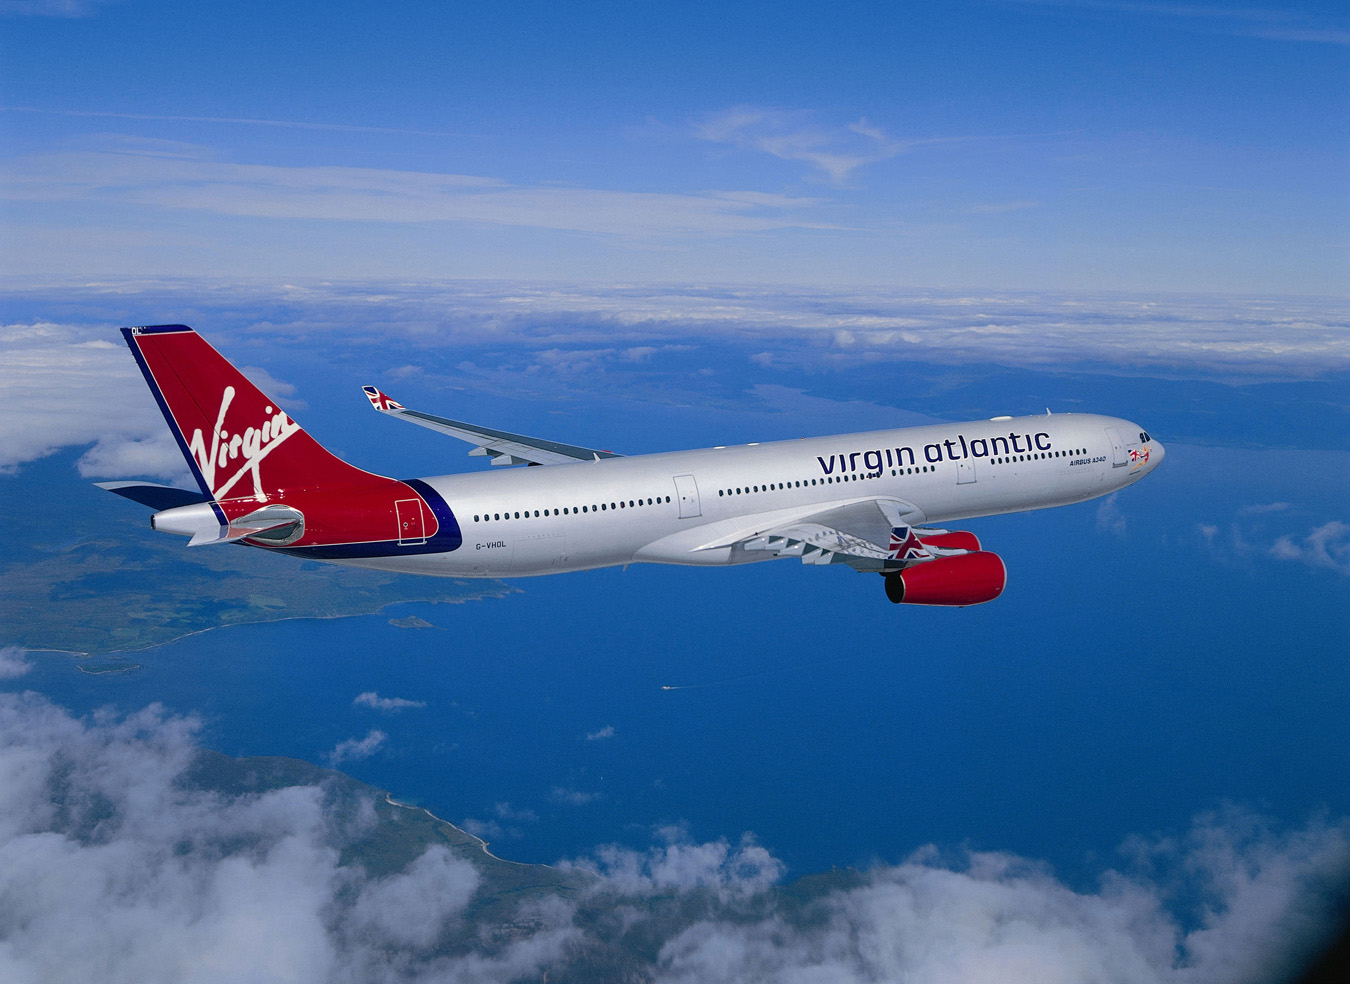 Virgin Atlantic Adds Mobile Signal to its London to New York Flights